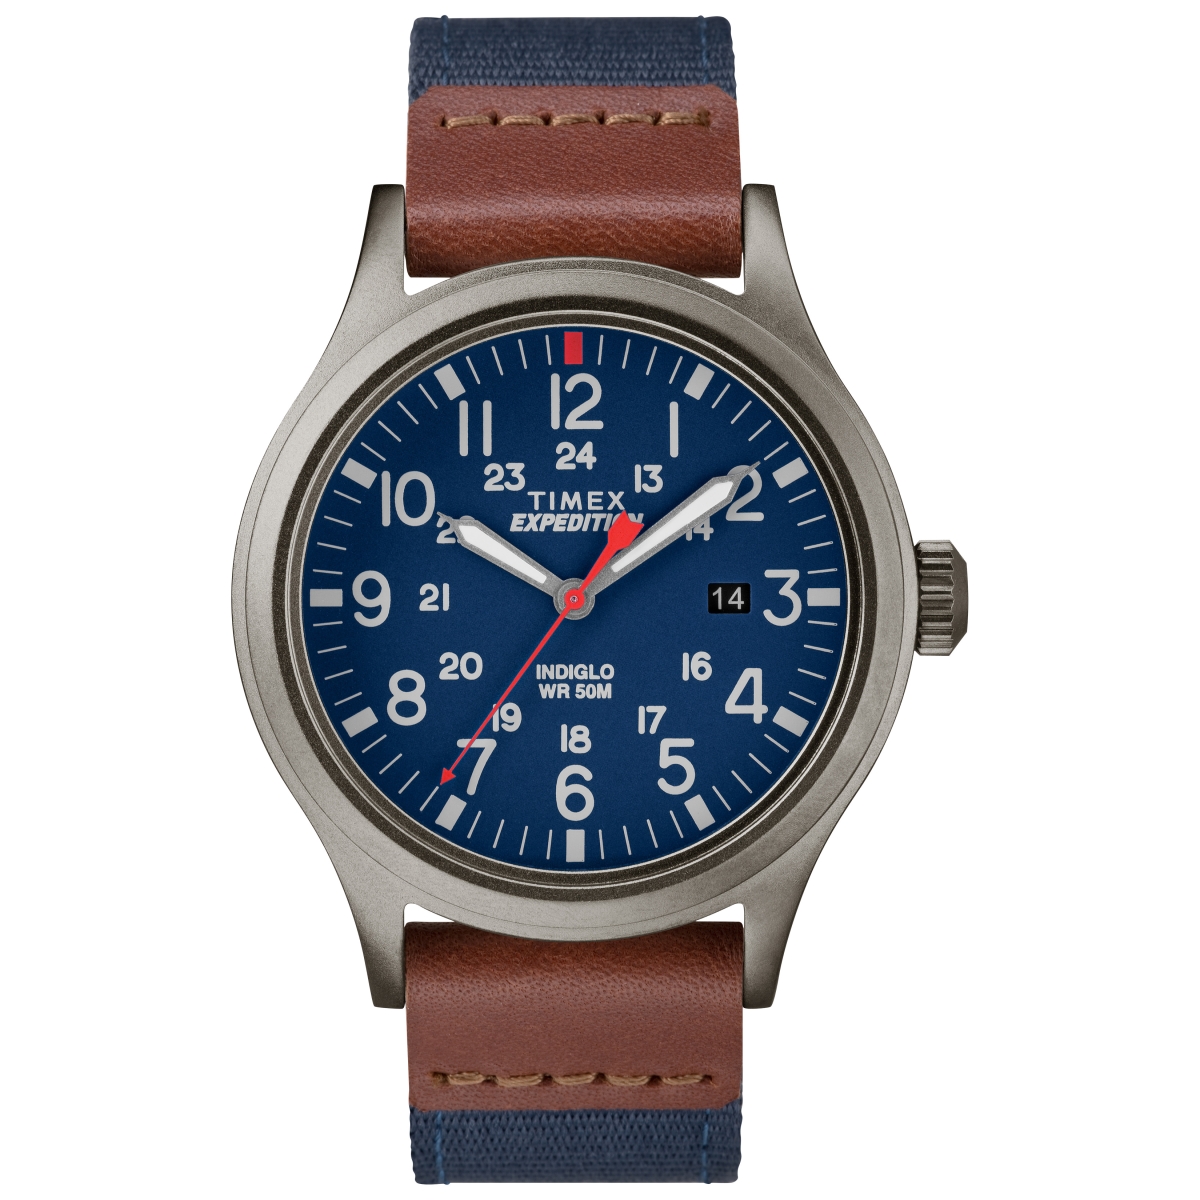 40 mm Mens Expedition Scout Leather & Nylon Strap Watch, Blue, Brown & Gray -  Timex, TI566363